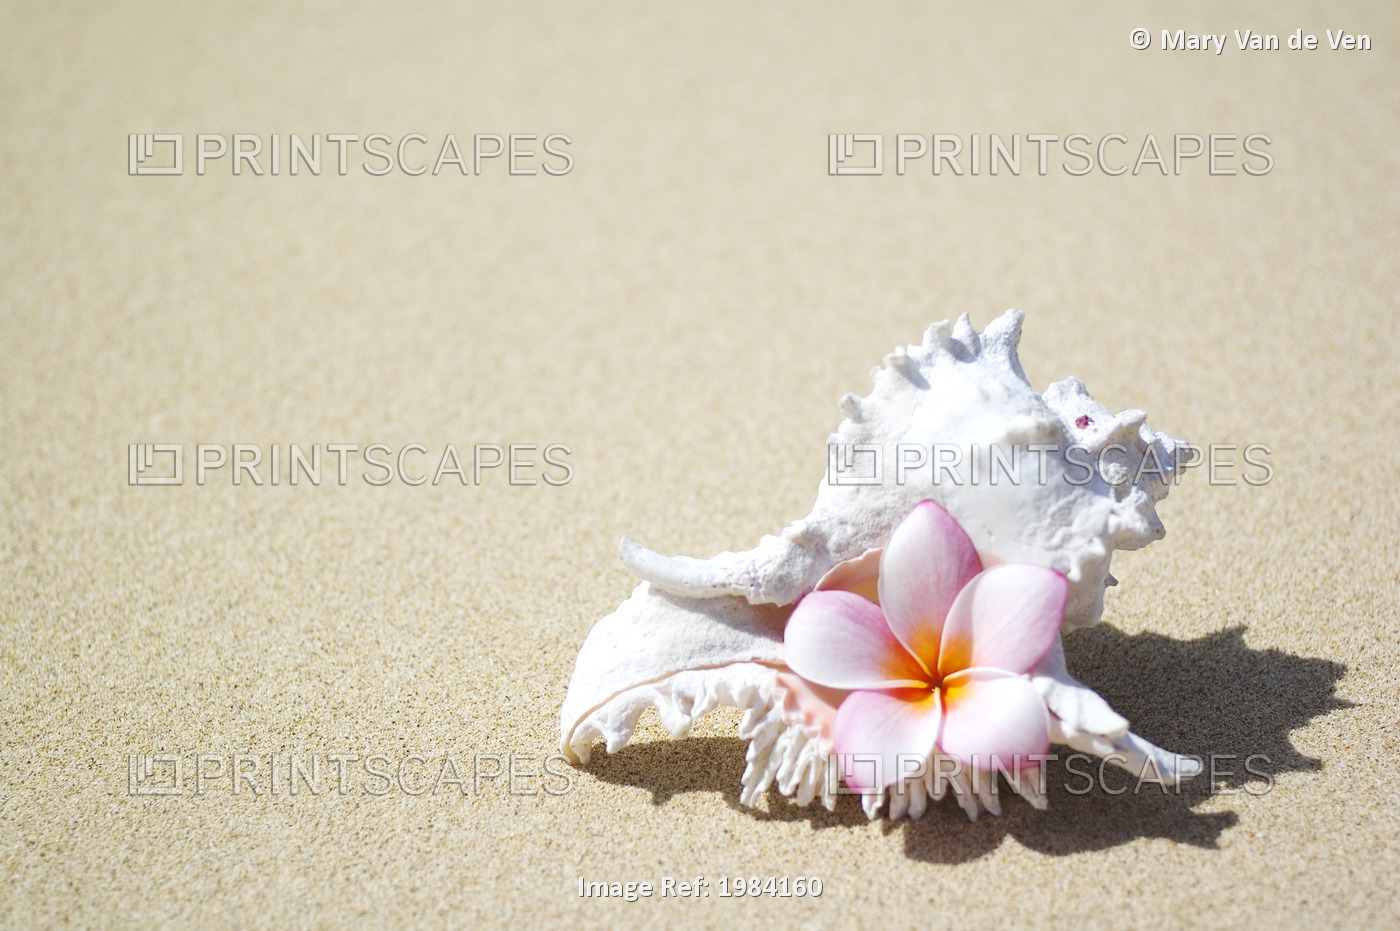 White Murex Shell On Sand With Pink Plumeria In Opening.